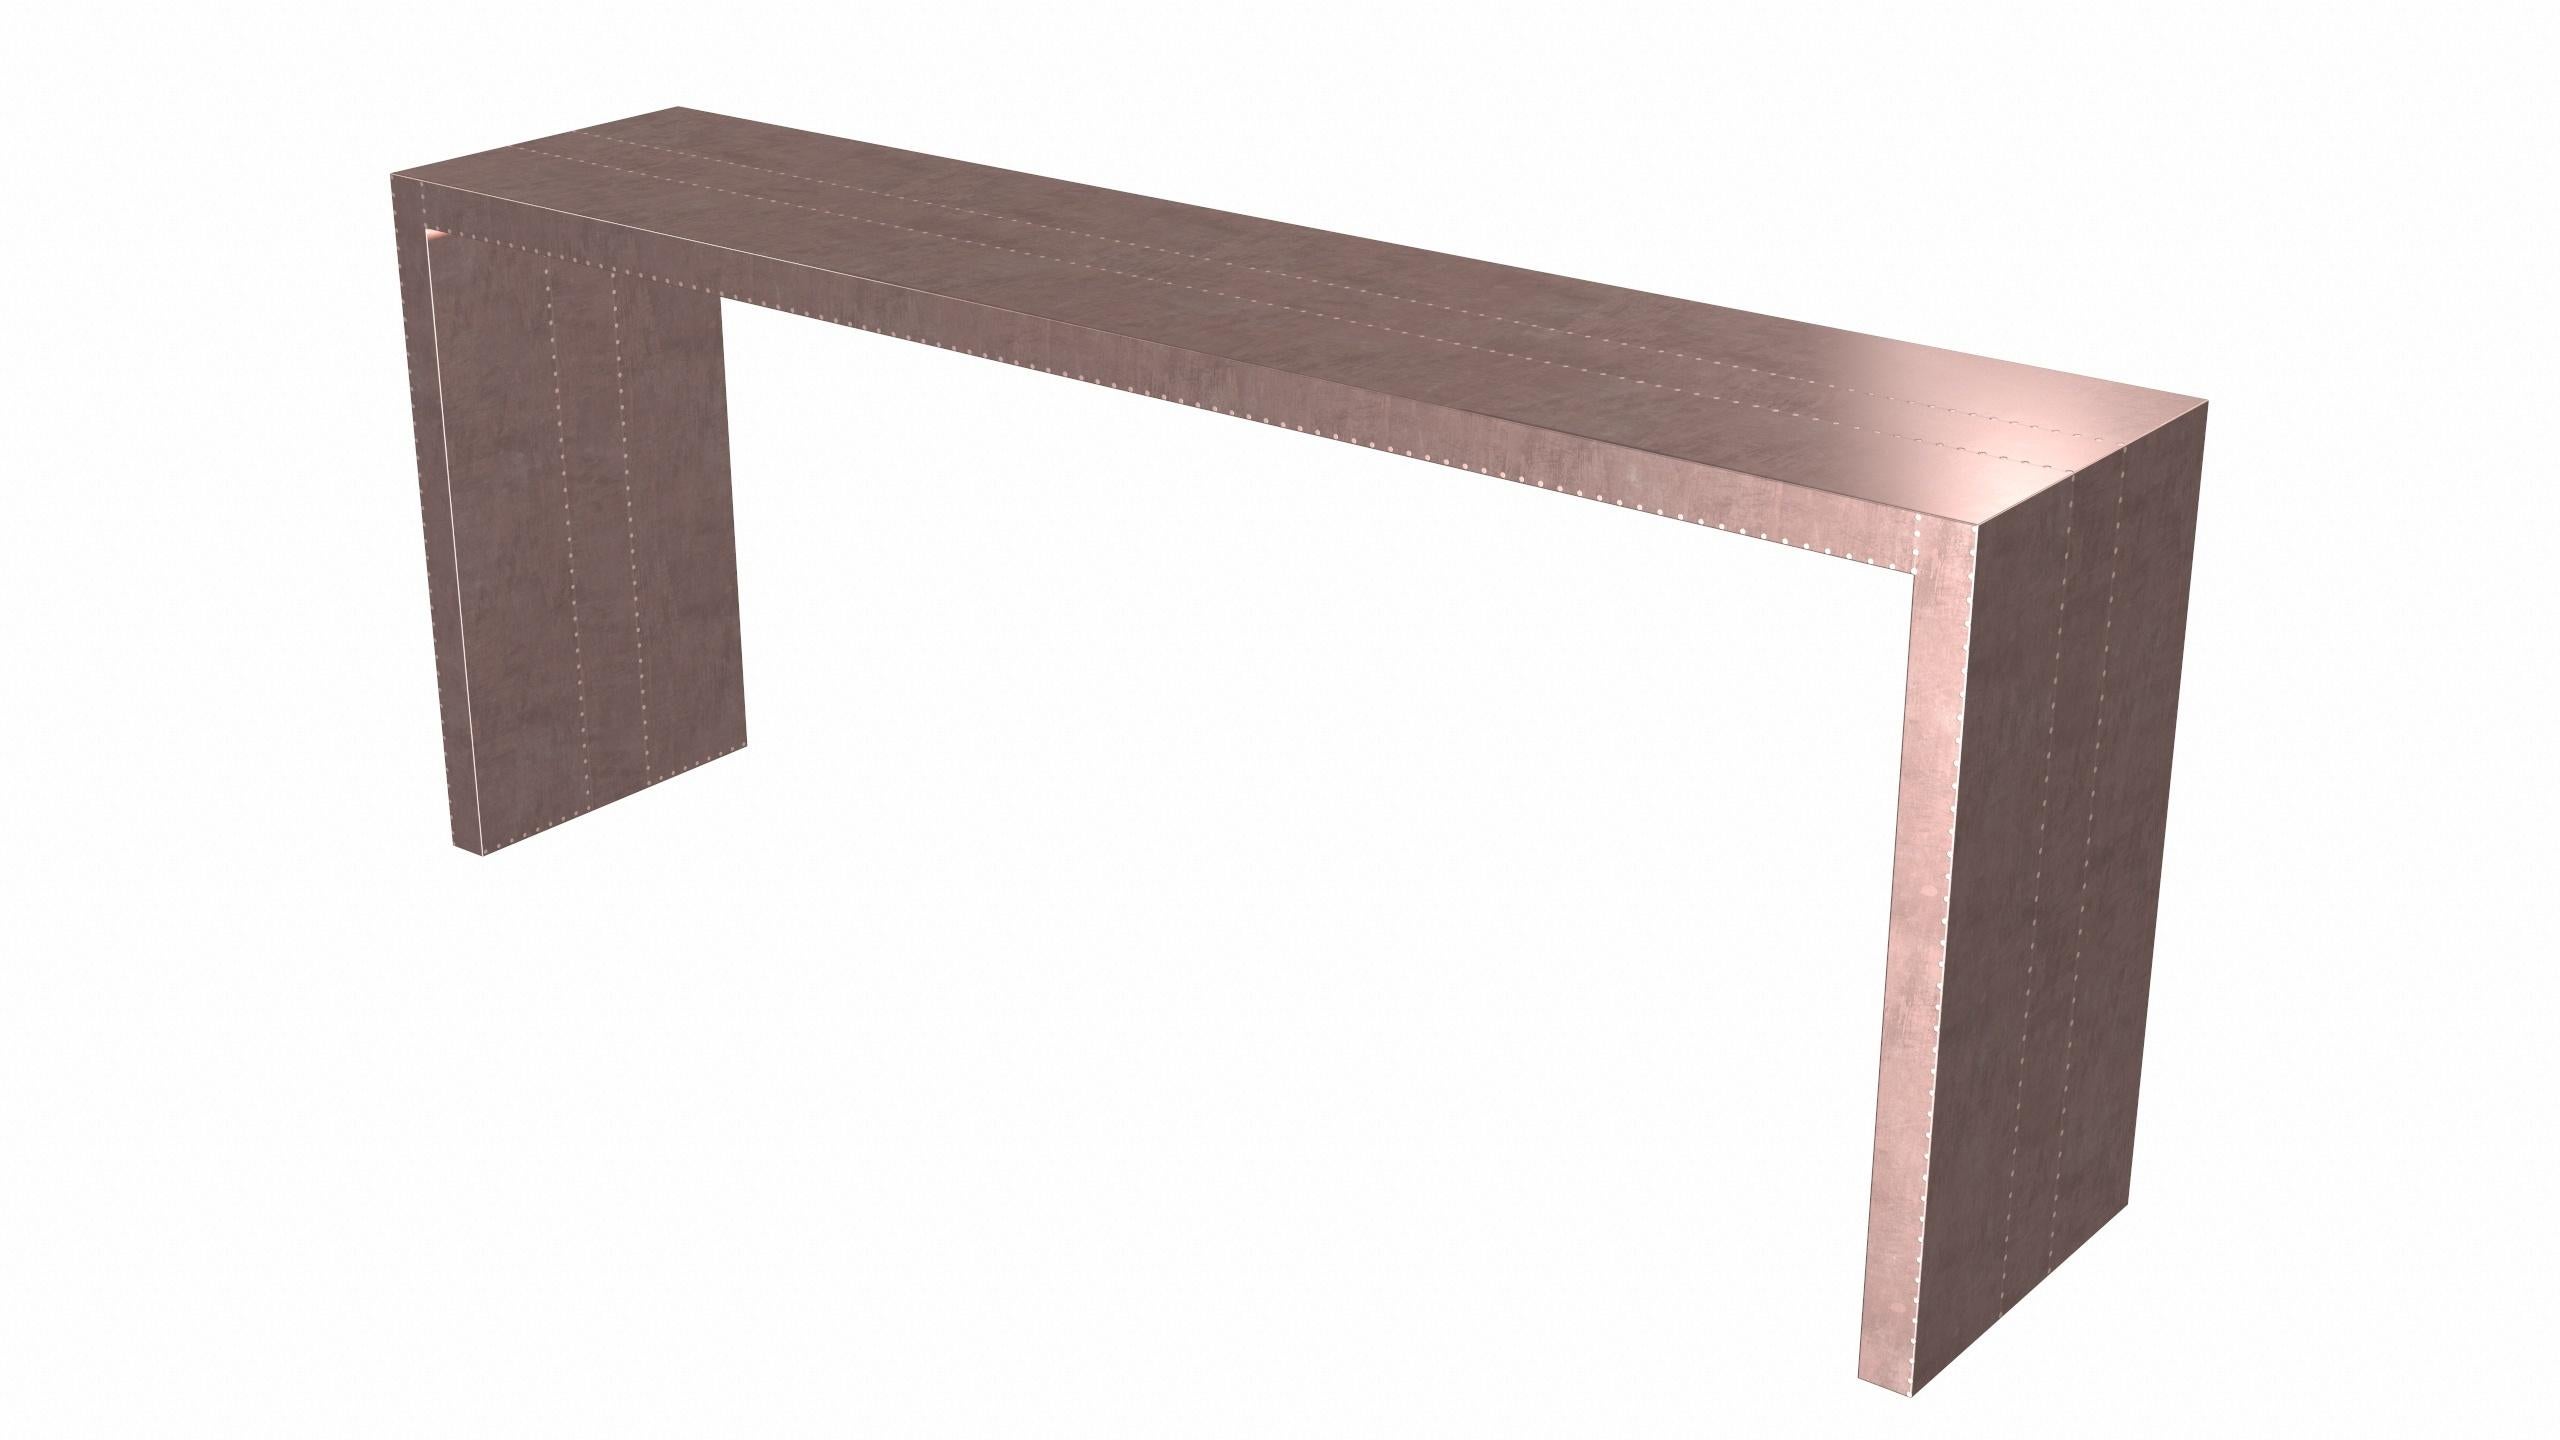 Contemporary Art Nouveau Tray Tables Rectangular Console in Smooth Copper by Alison Spear For Sale